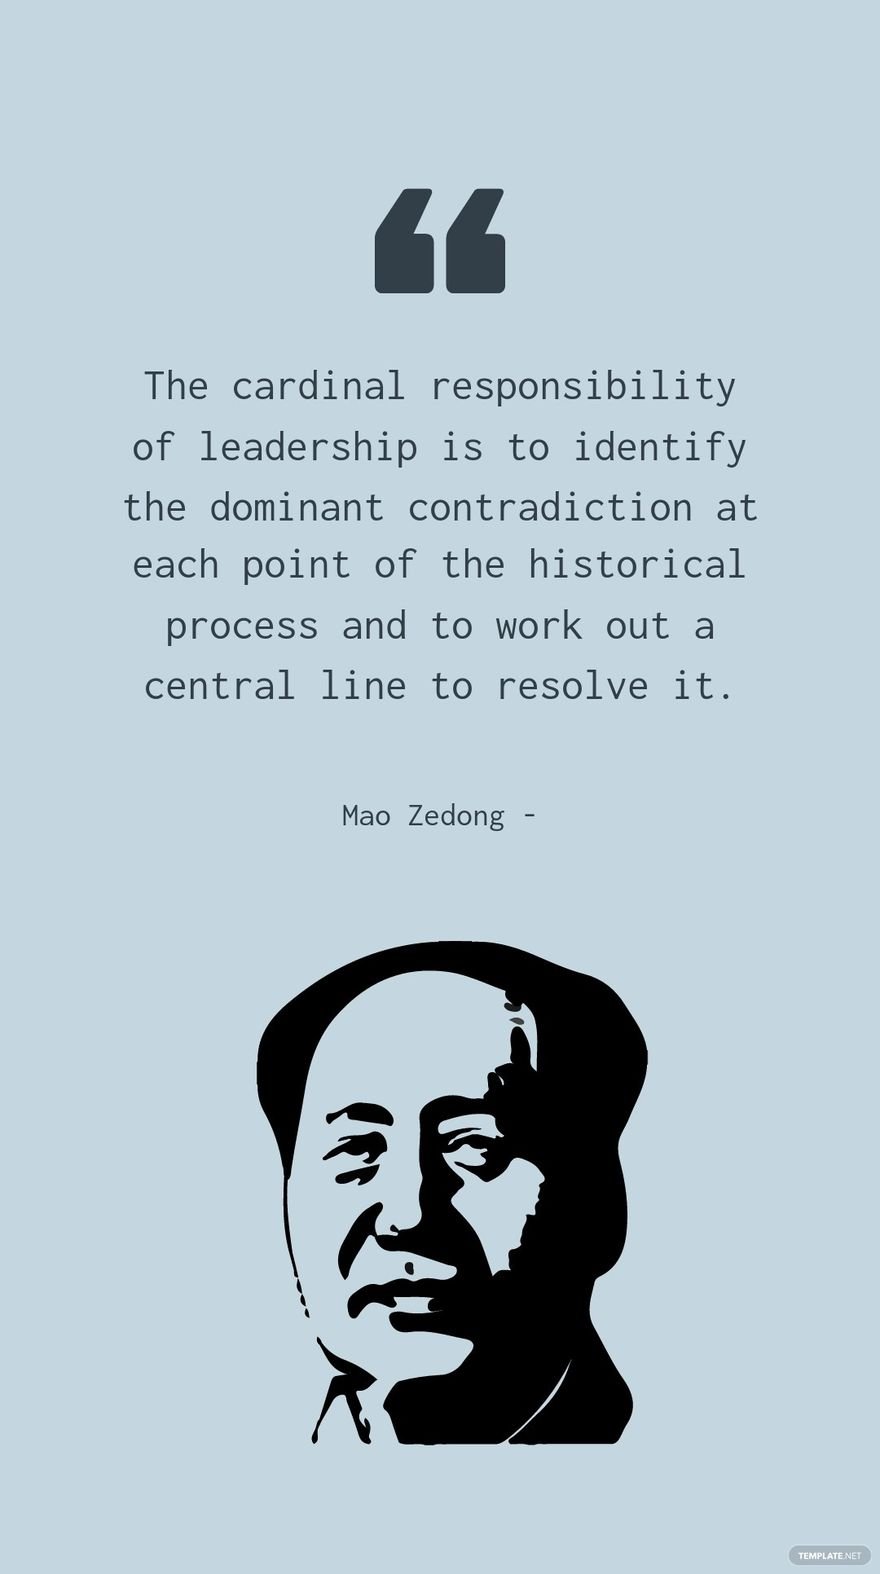 Free Mao Zedong - The cardinal responsibility of leadership is to identify the dominant contradiction at each point of the historical process and to work out a central line to resolve it.